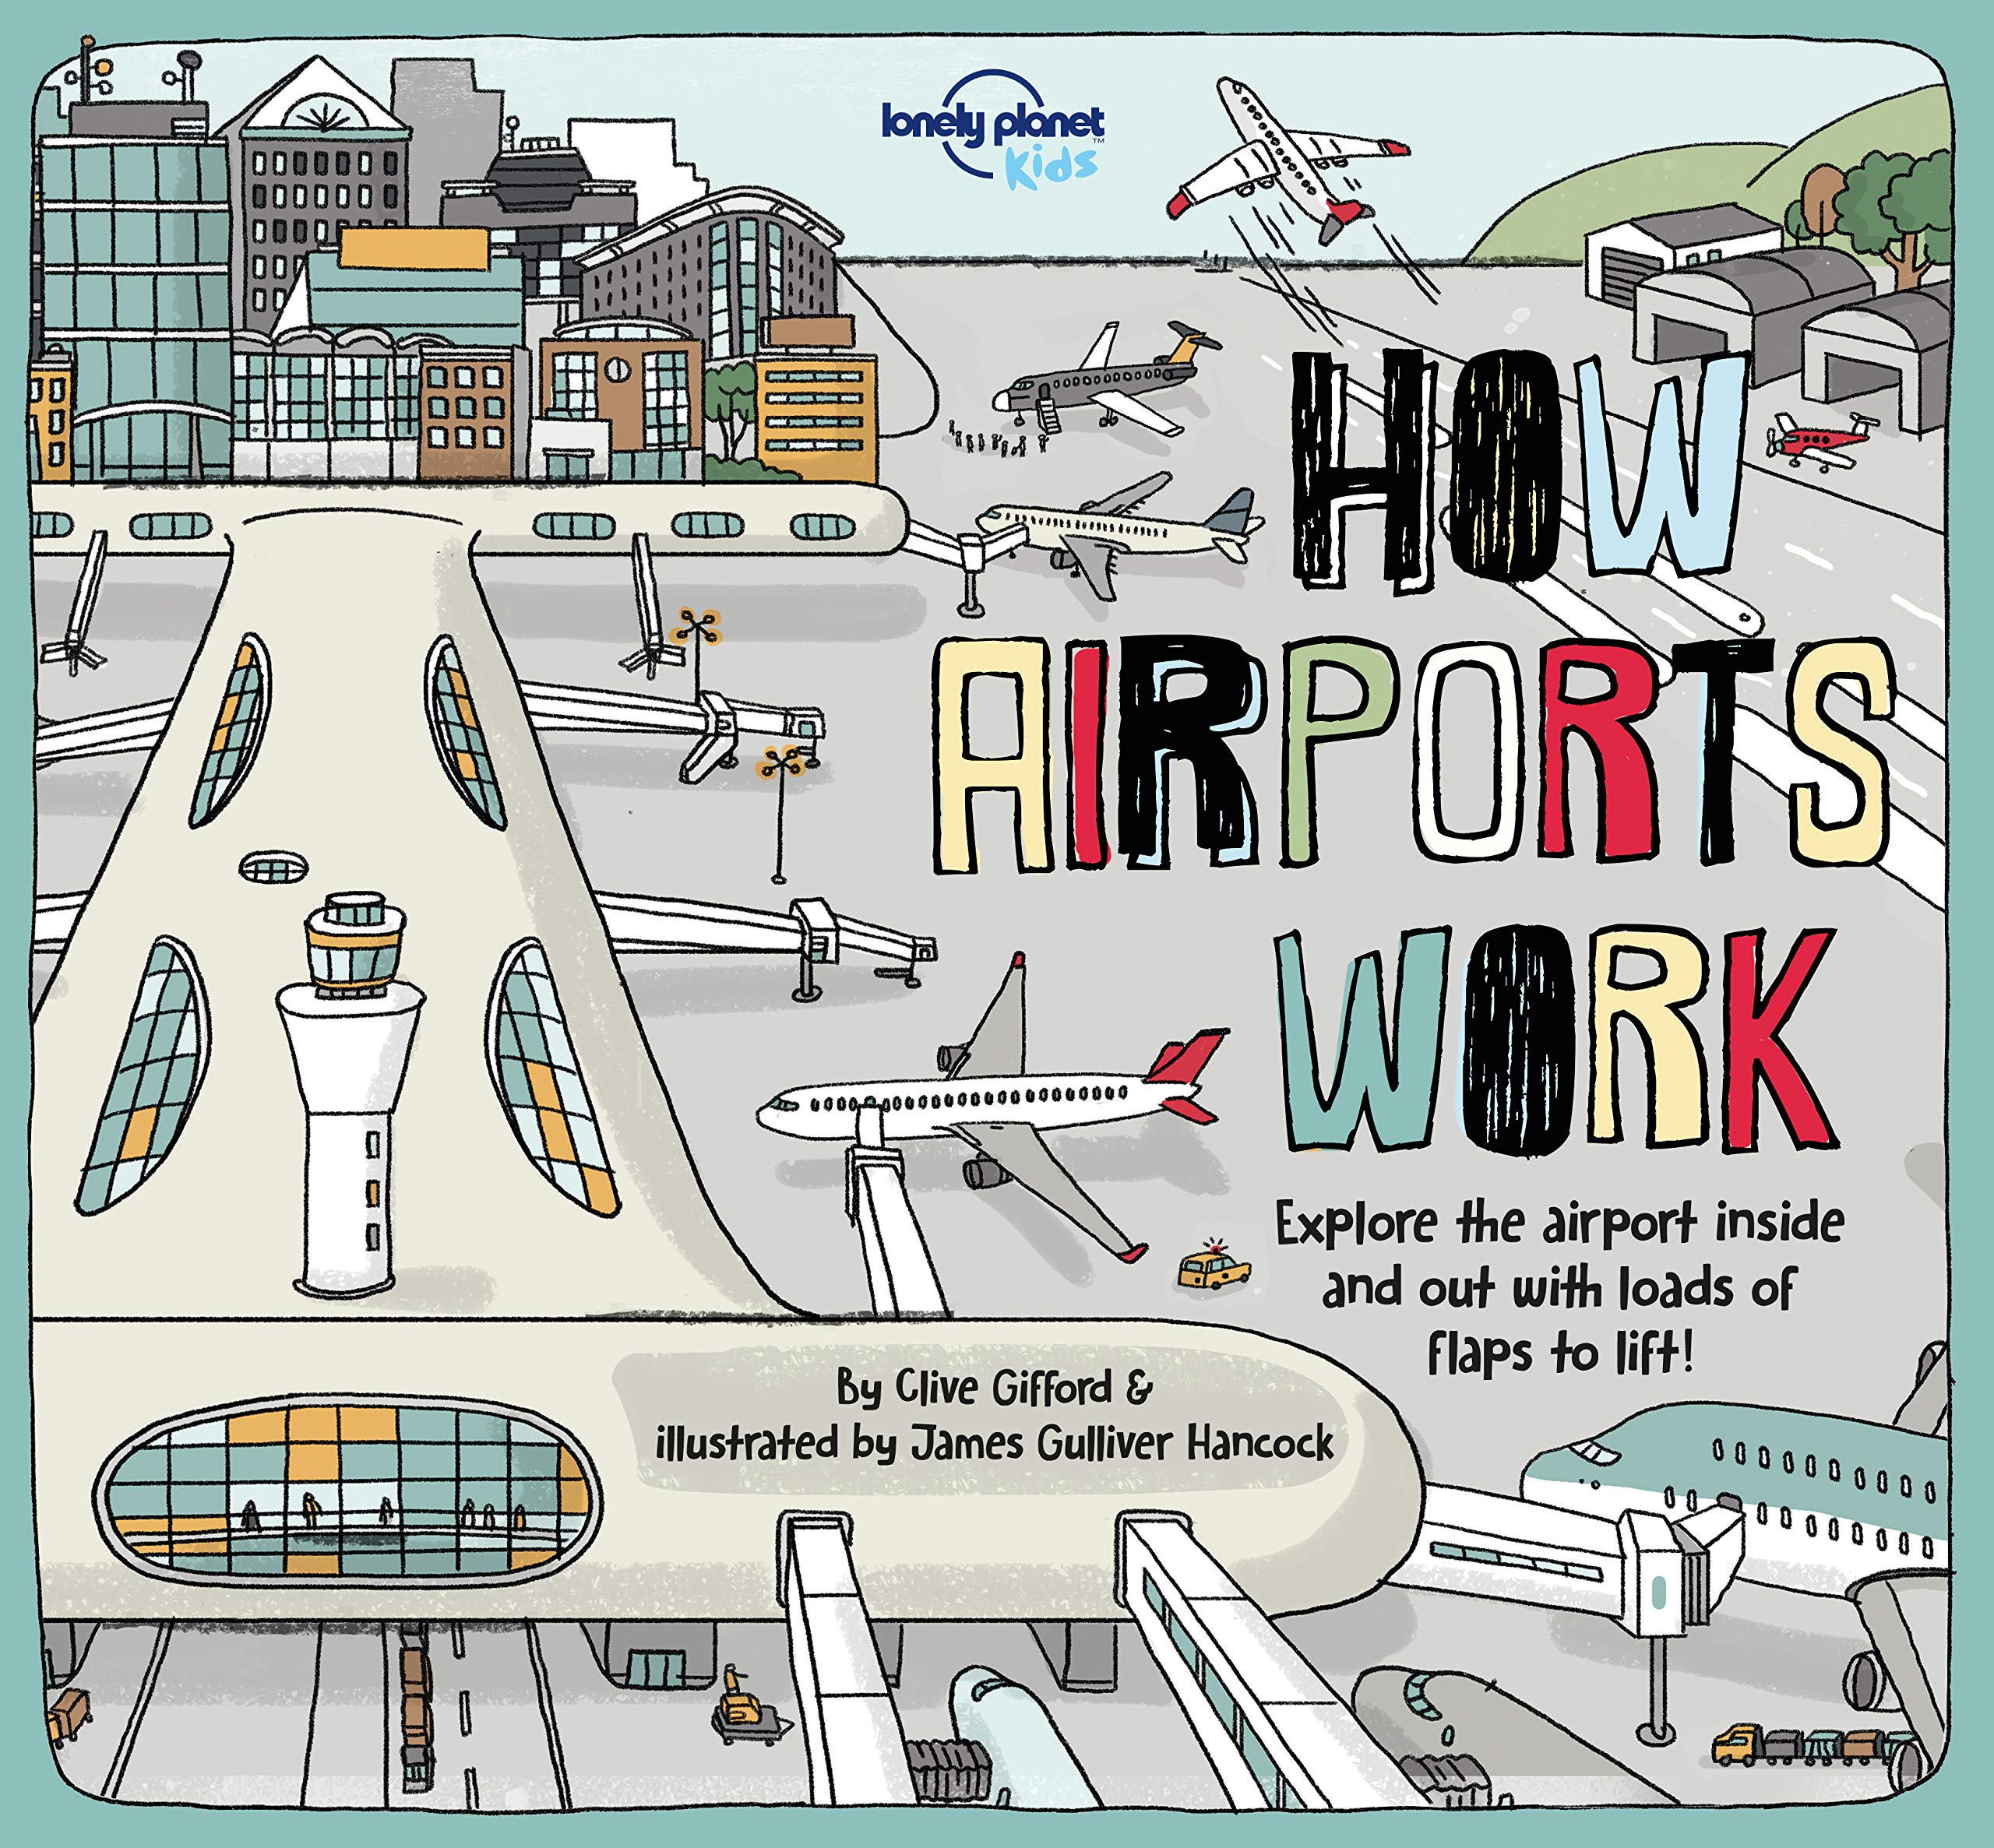 How Airports Work: Explore the Airport Inside and Out!